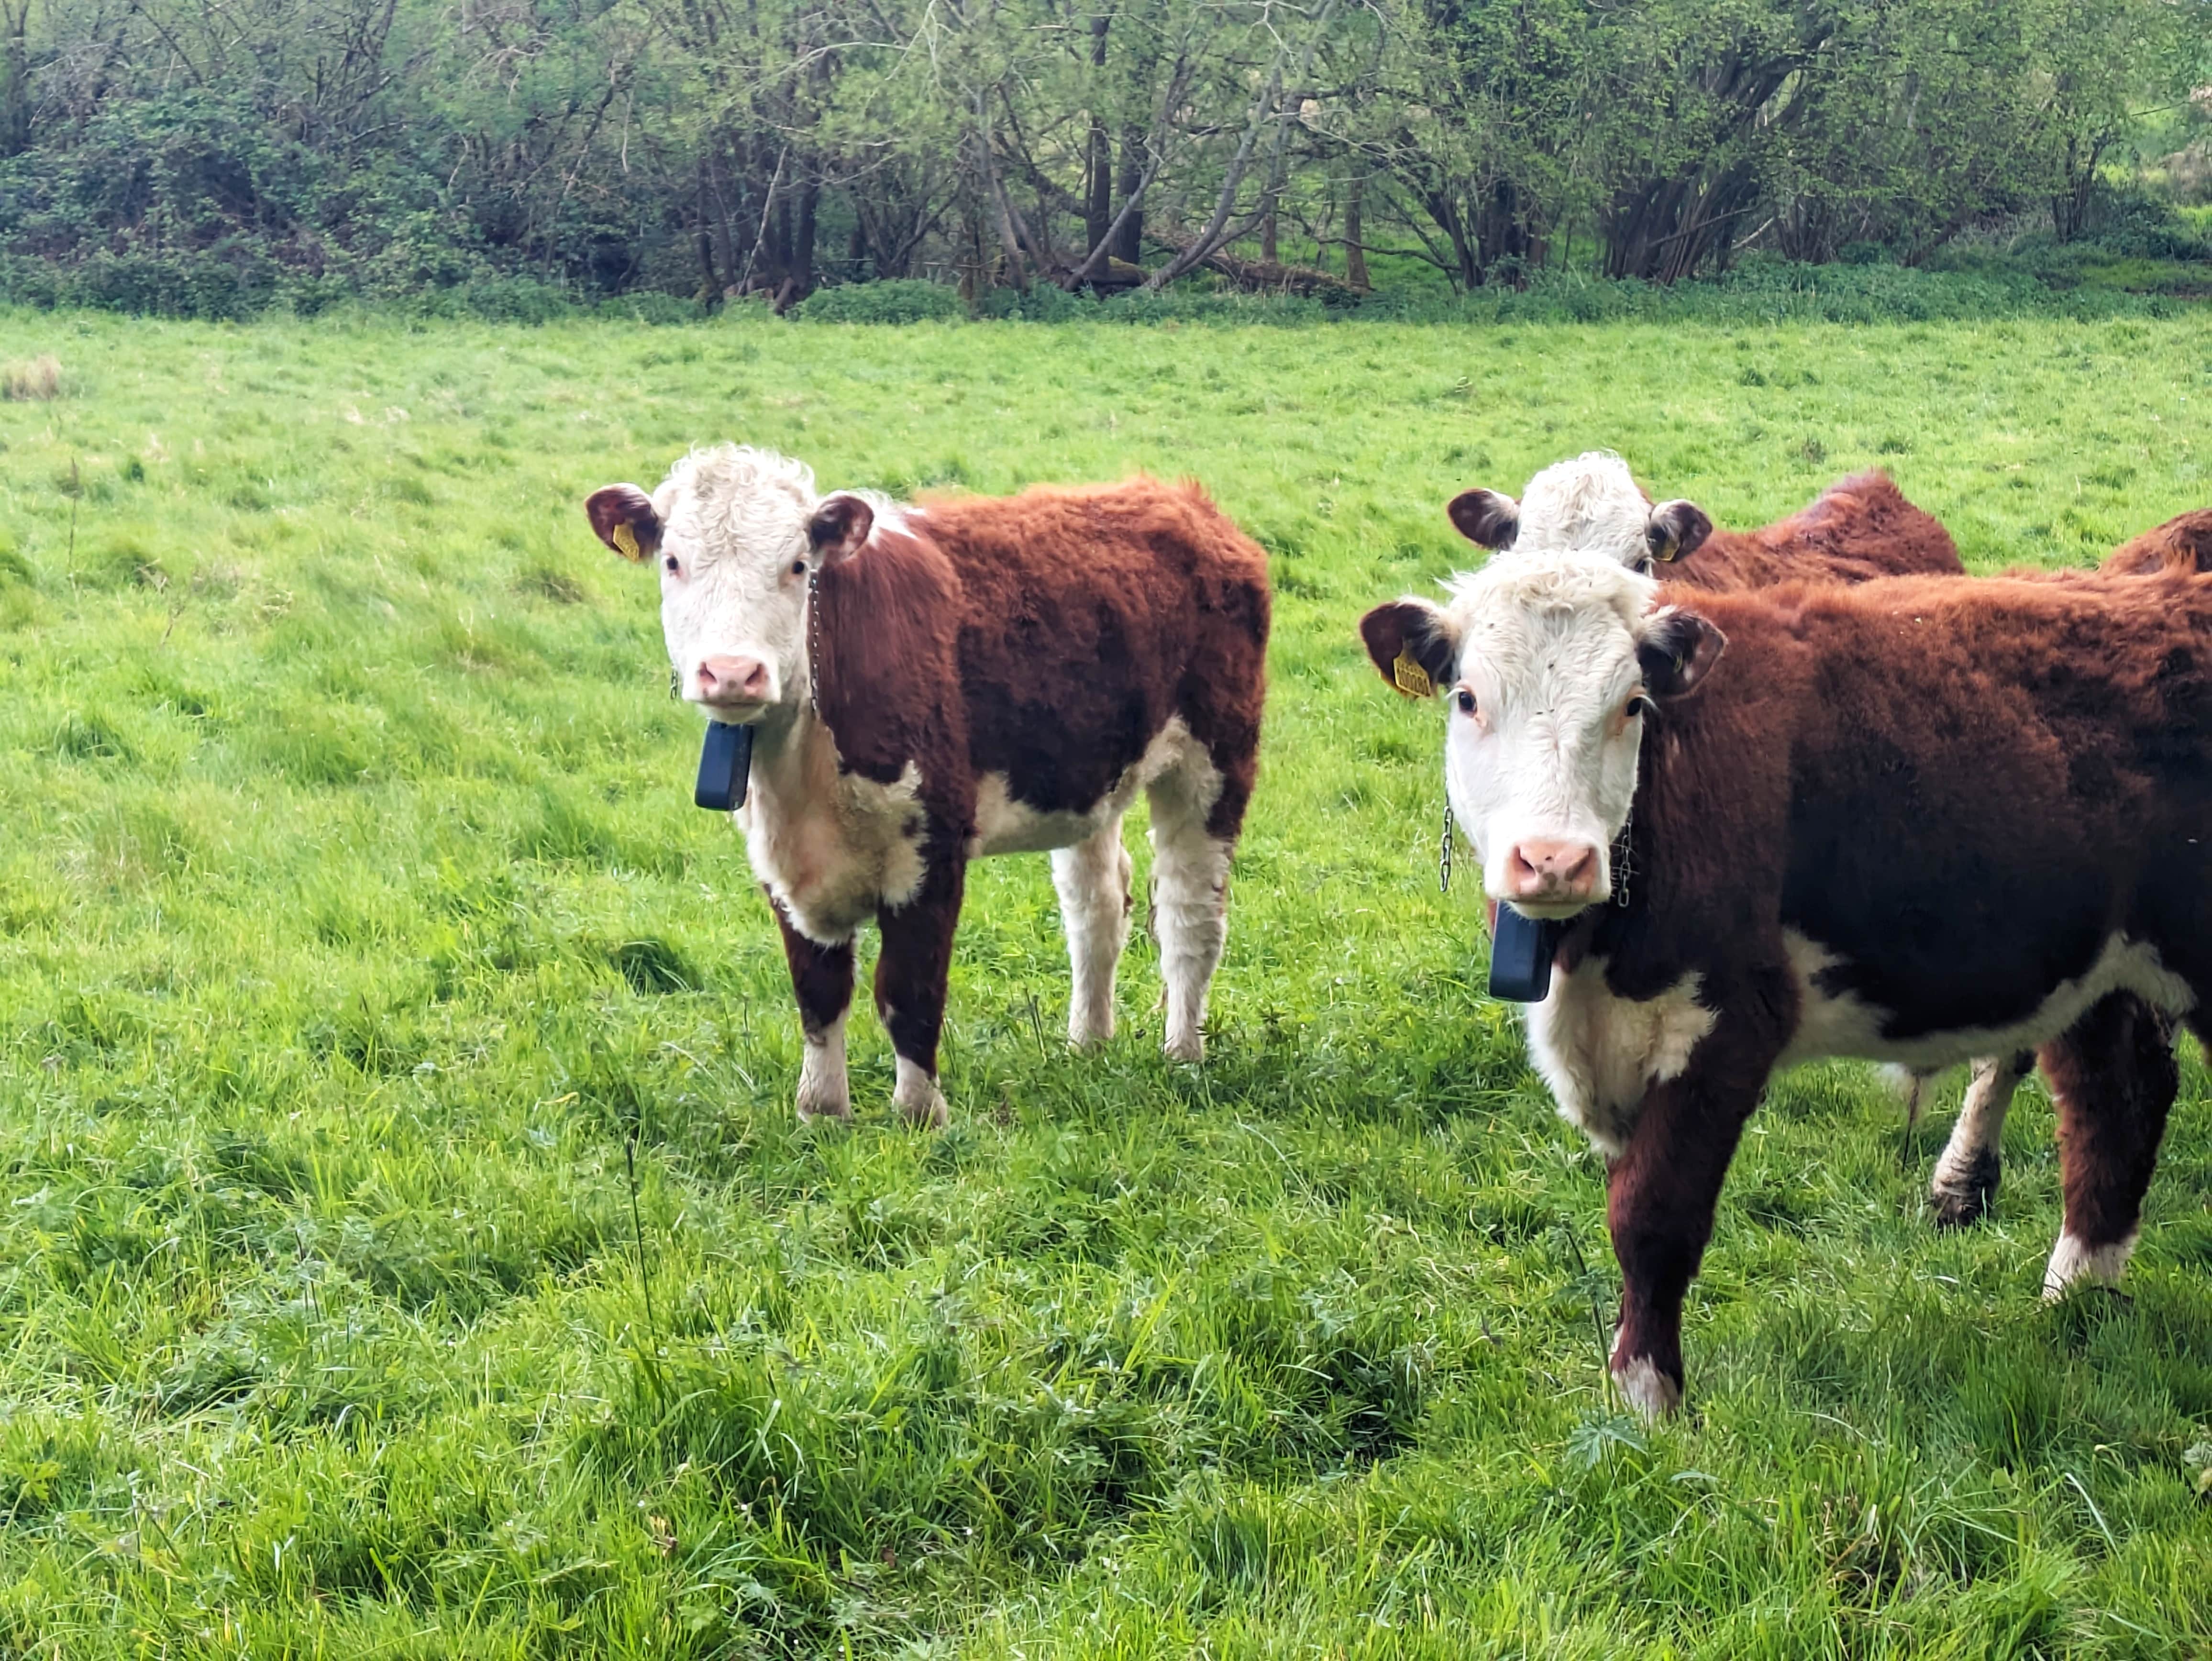 Cows in a field at Romshed Farm in Kent